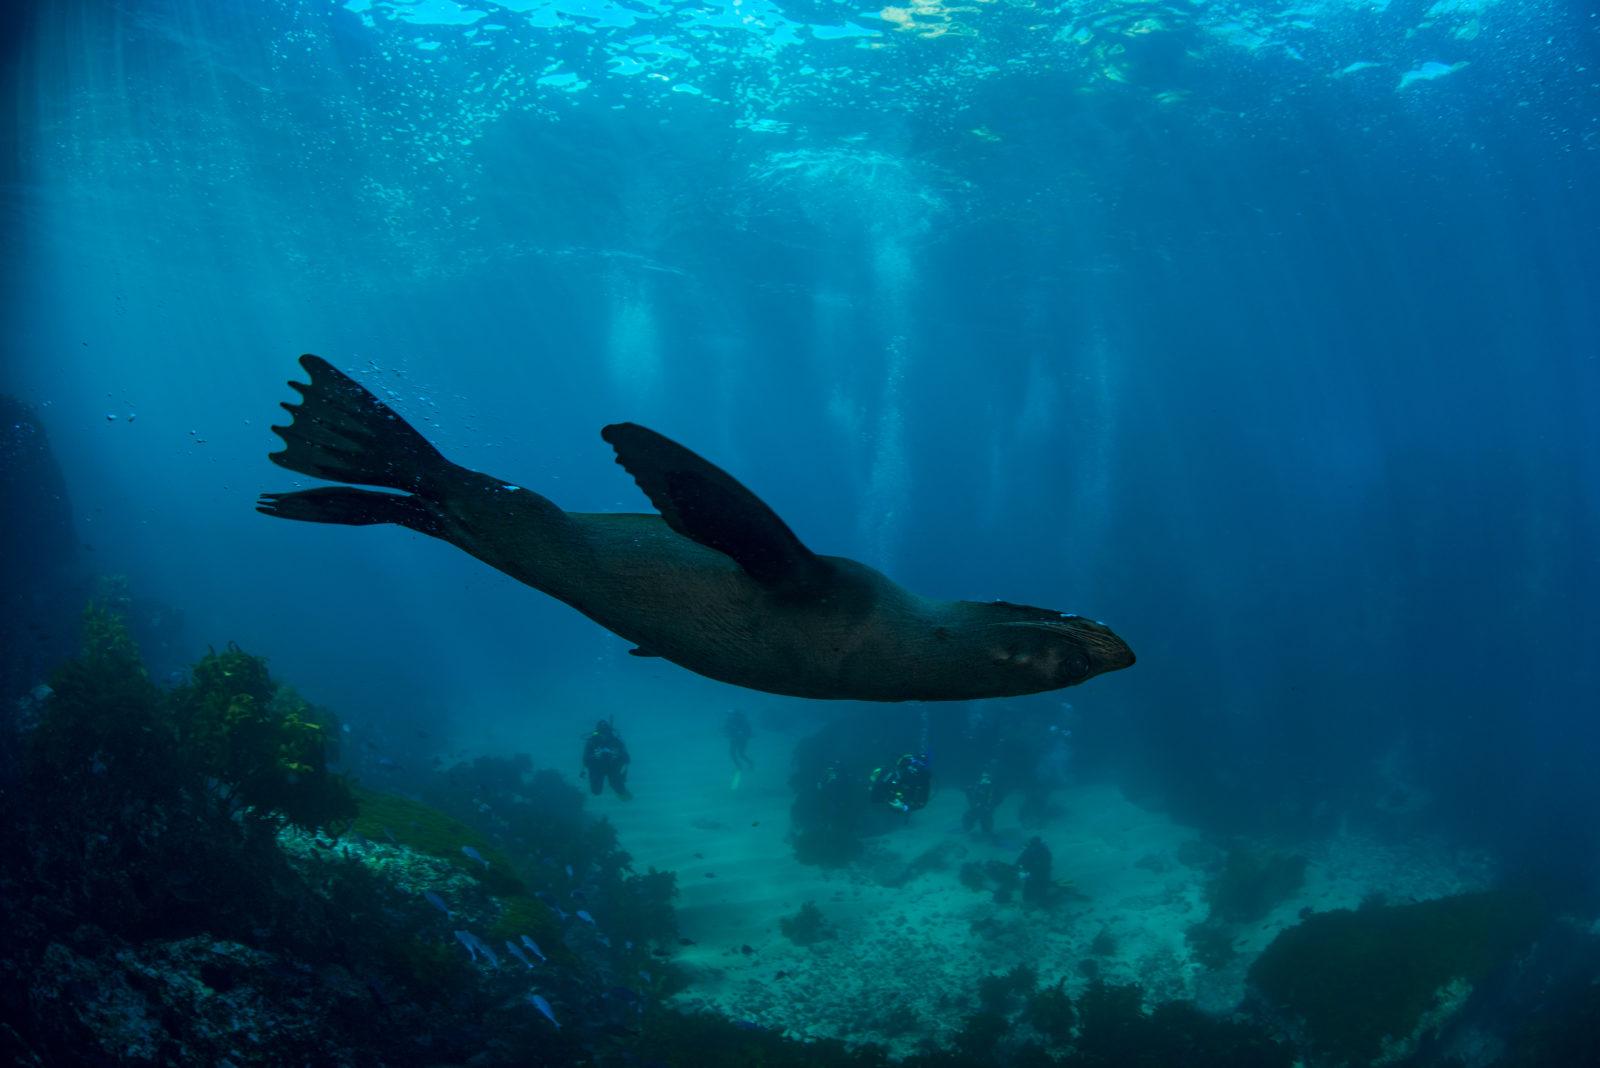 New Zealand Fur Seal. Winter Diving at Mokohinau Islands by Alex Stammers